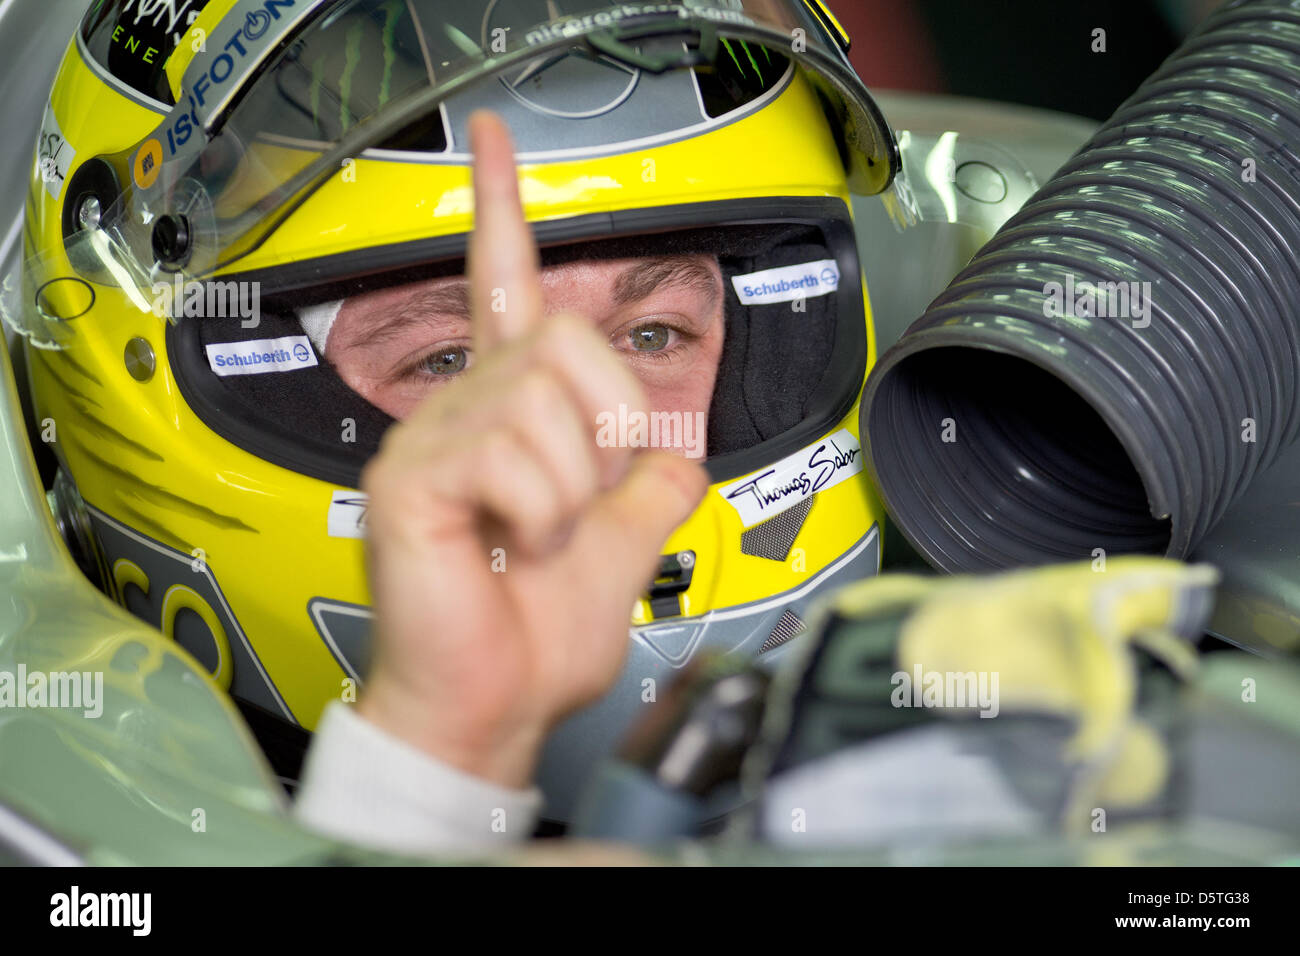 German Formula One driver Nico Rosberg of Mercedes AMG sits in his car during the third practice session at the Autodromo Jose Carlos Pace in Sao Paulo, Brazil, 24 November 2012. The Formula One Grand Prix of Brazil will take place on 25 November 2012. Photo: David Ebener/dpa Stock Photo